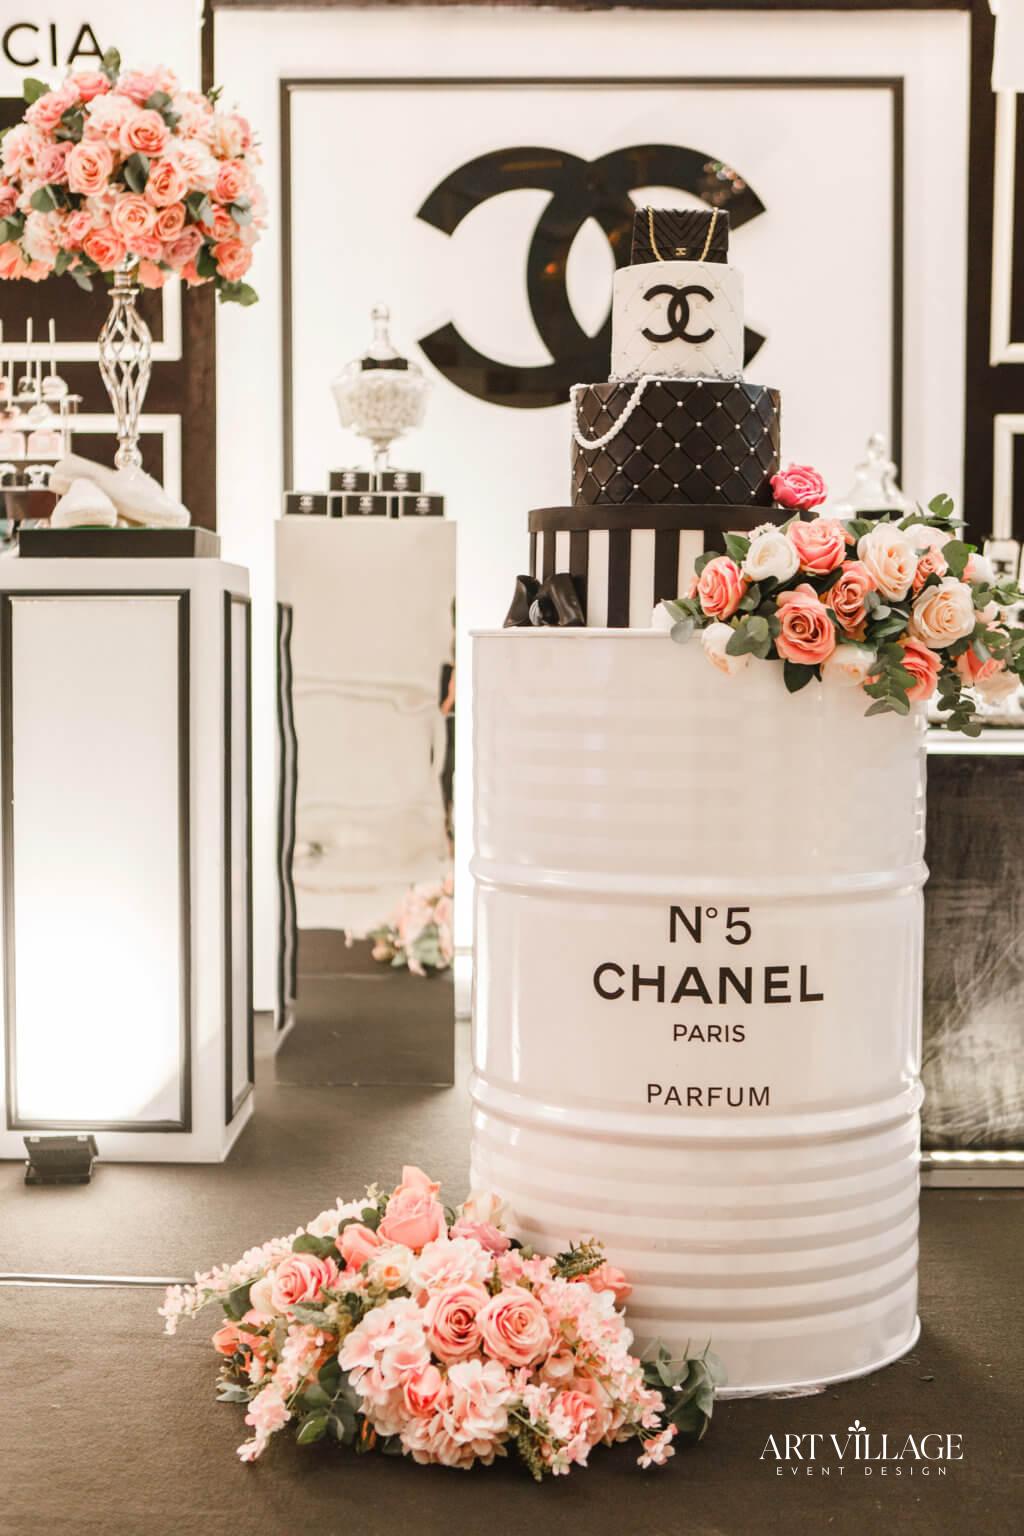 Chanel Party Ideas for a Grown Up Birthday